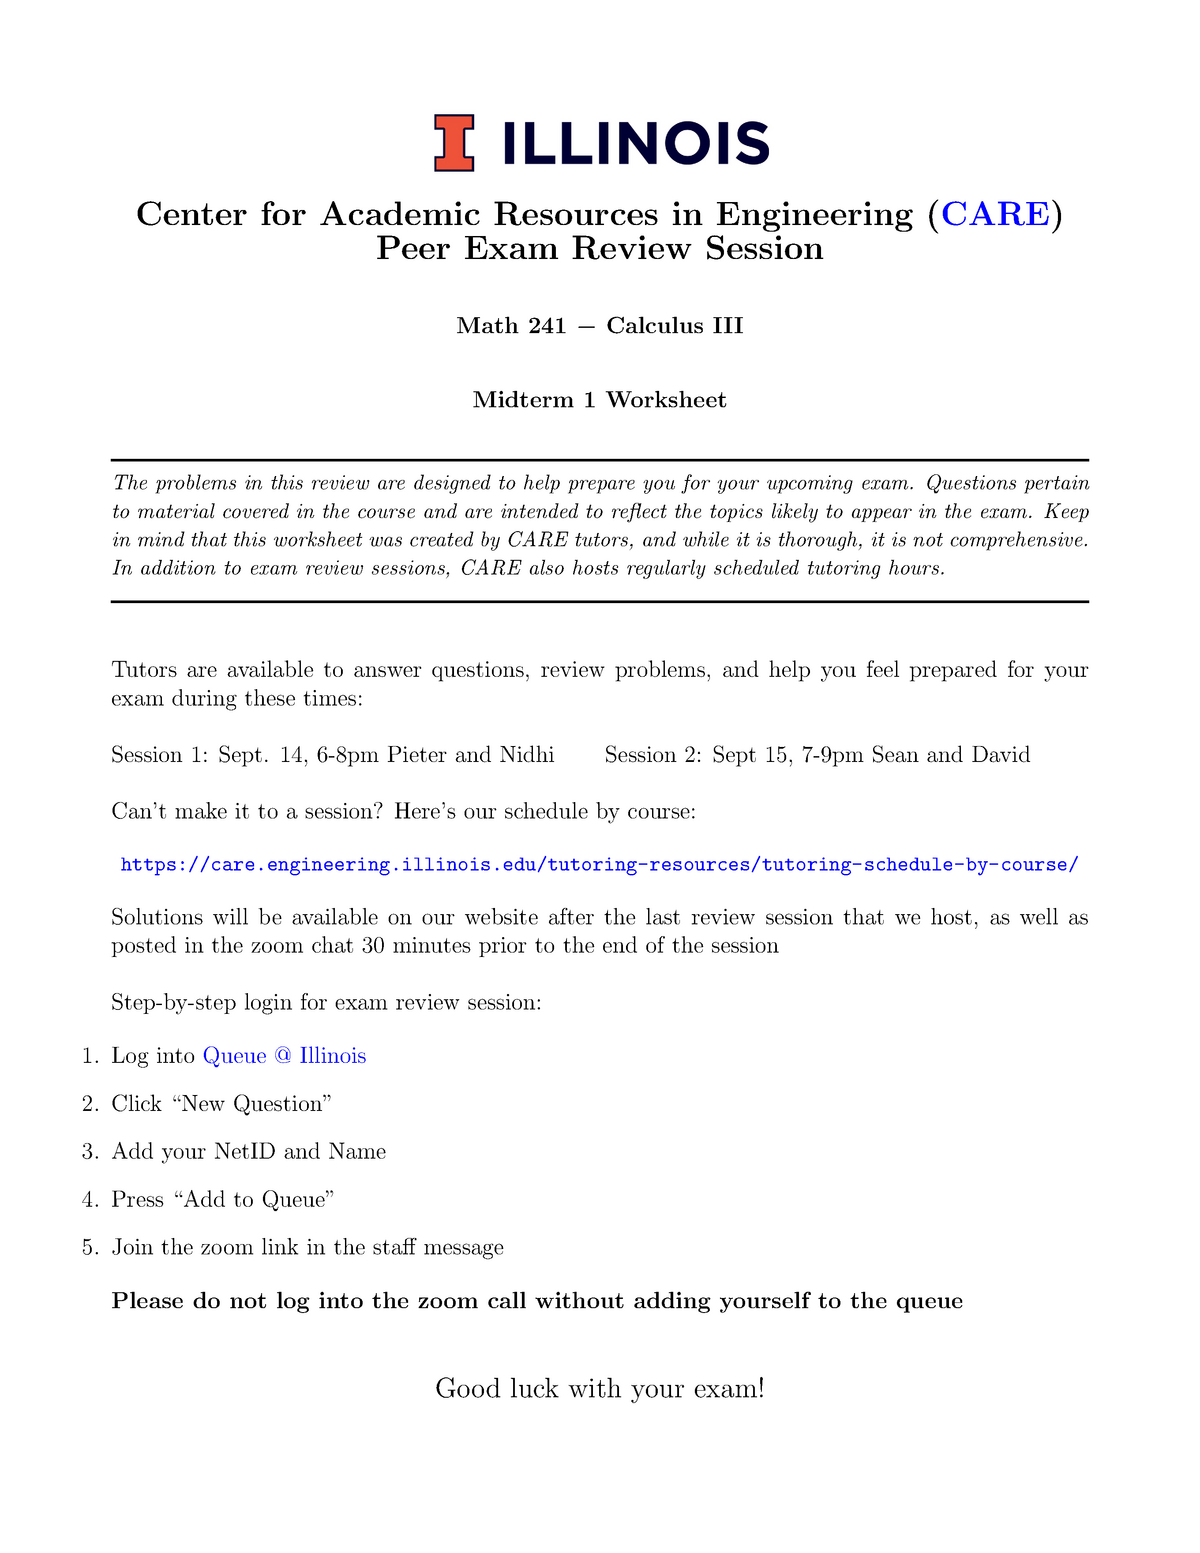 MATH241 Final Exam Review WS 1 Center for Academic Resources in